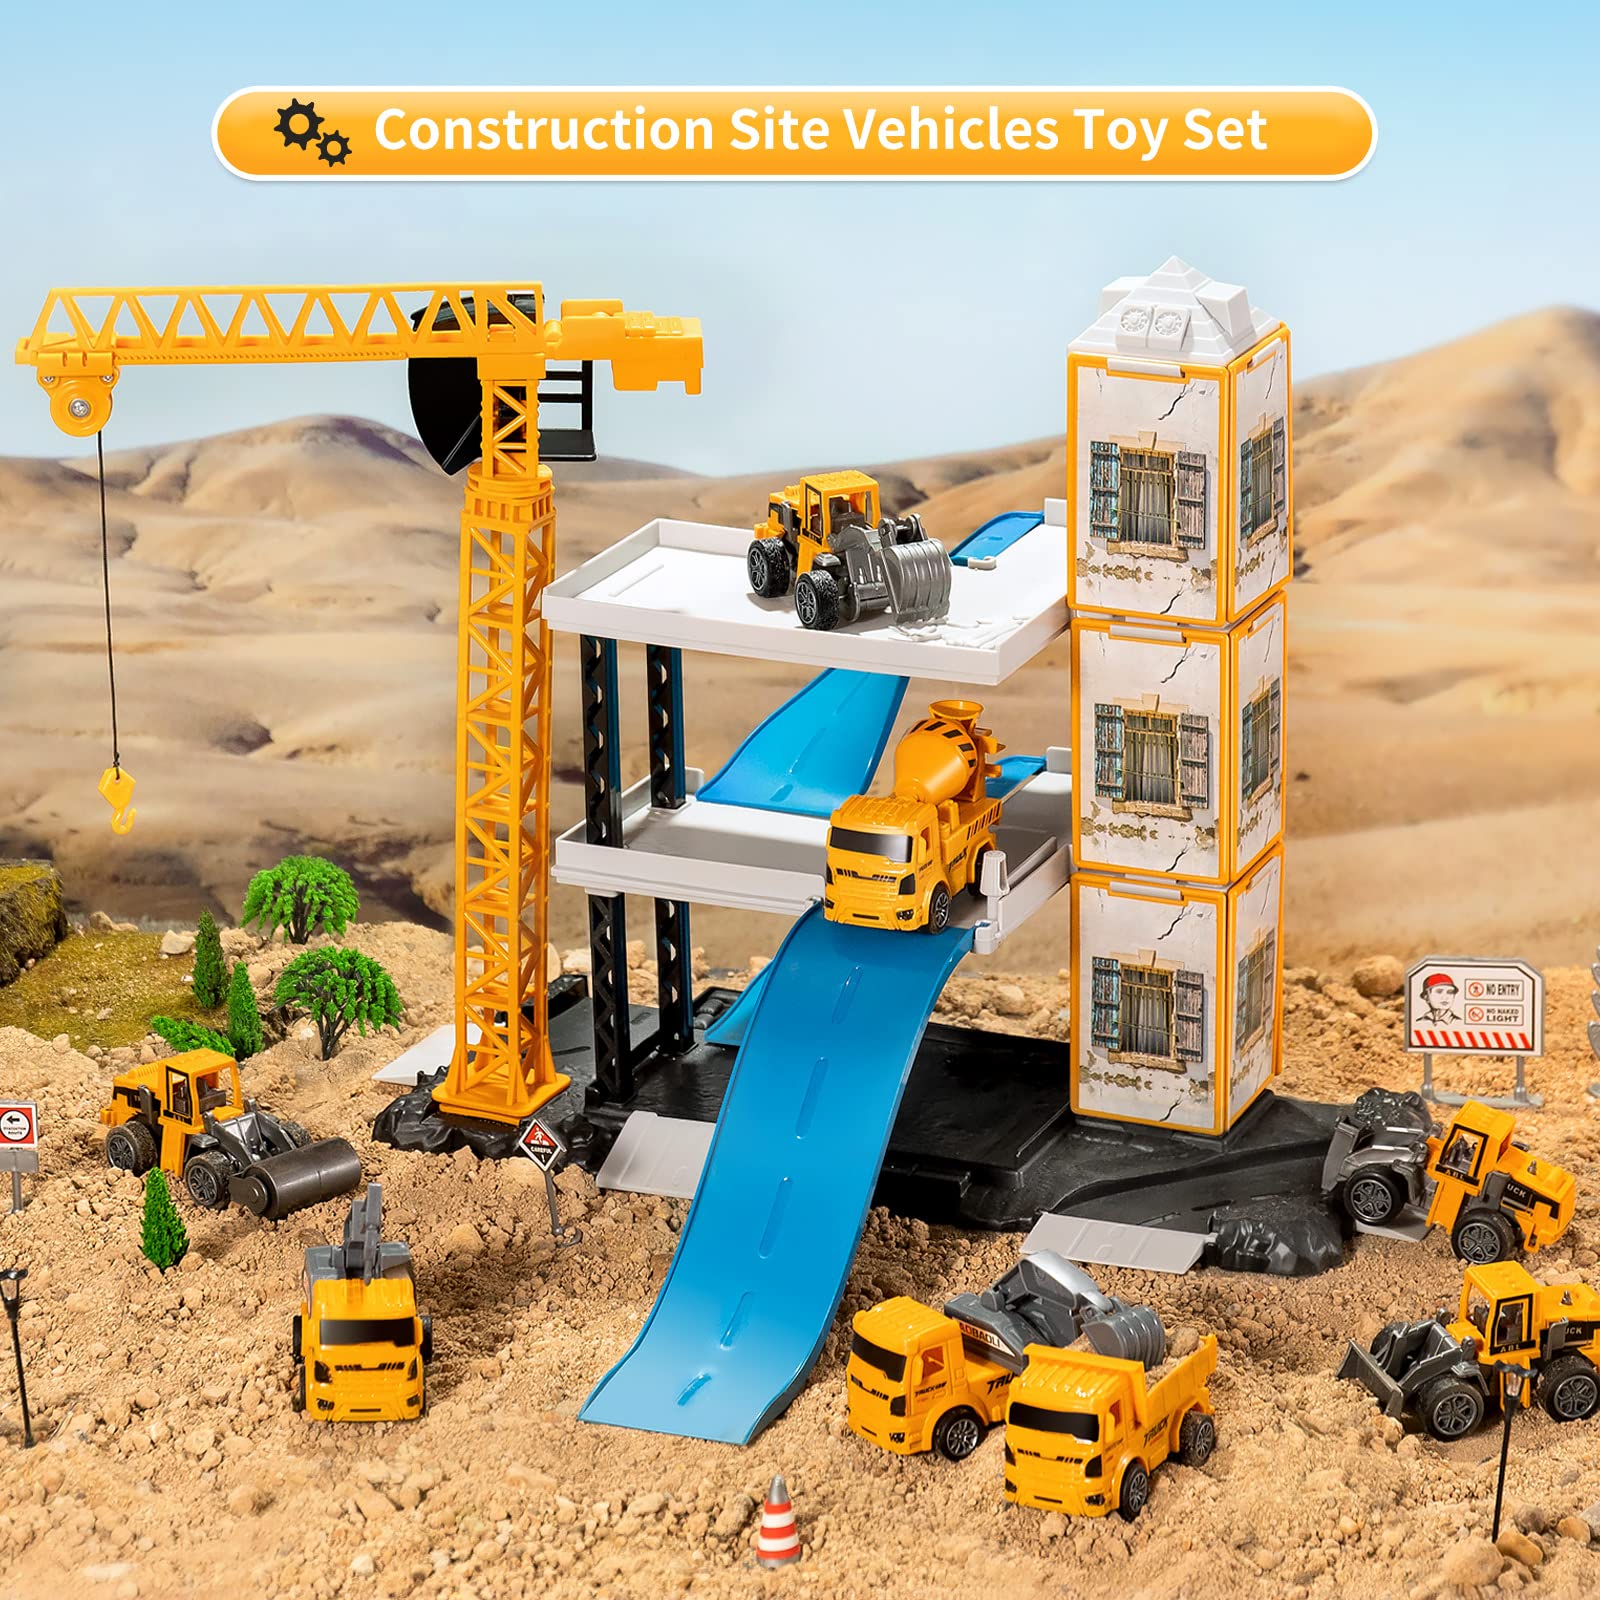 TEMI Construction Vehicles Toy for Boys, 60PCS Kids Engineering Trucks Vehicle w/ Tractor, Crane, Dump, Excavator and Map, Birthday Gift Toys for 3 4 5 6 7 Year Old Boys Children Toddlers